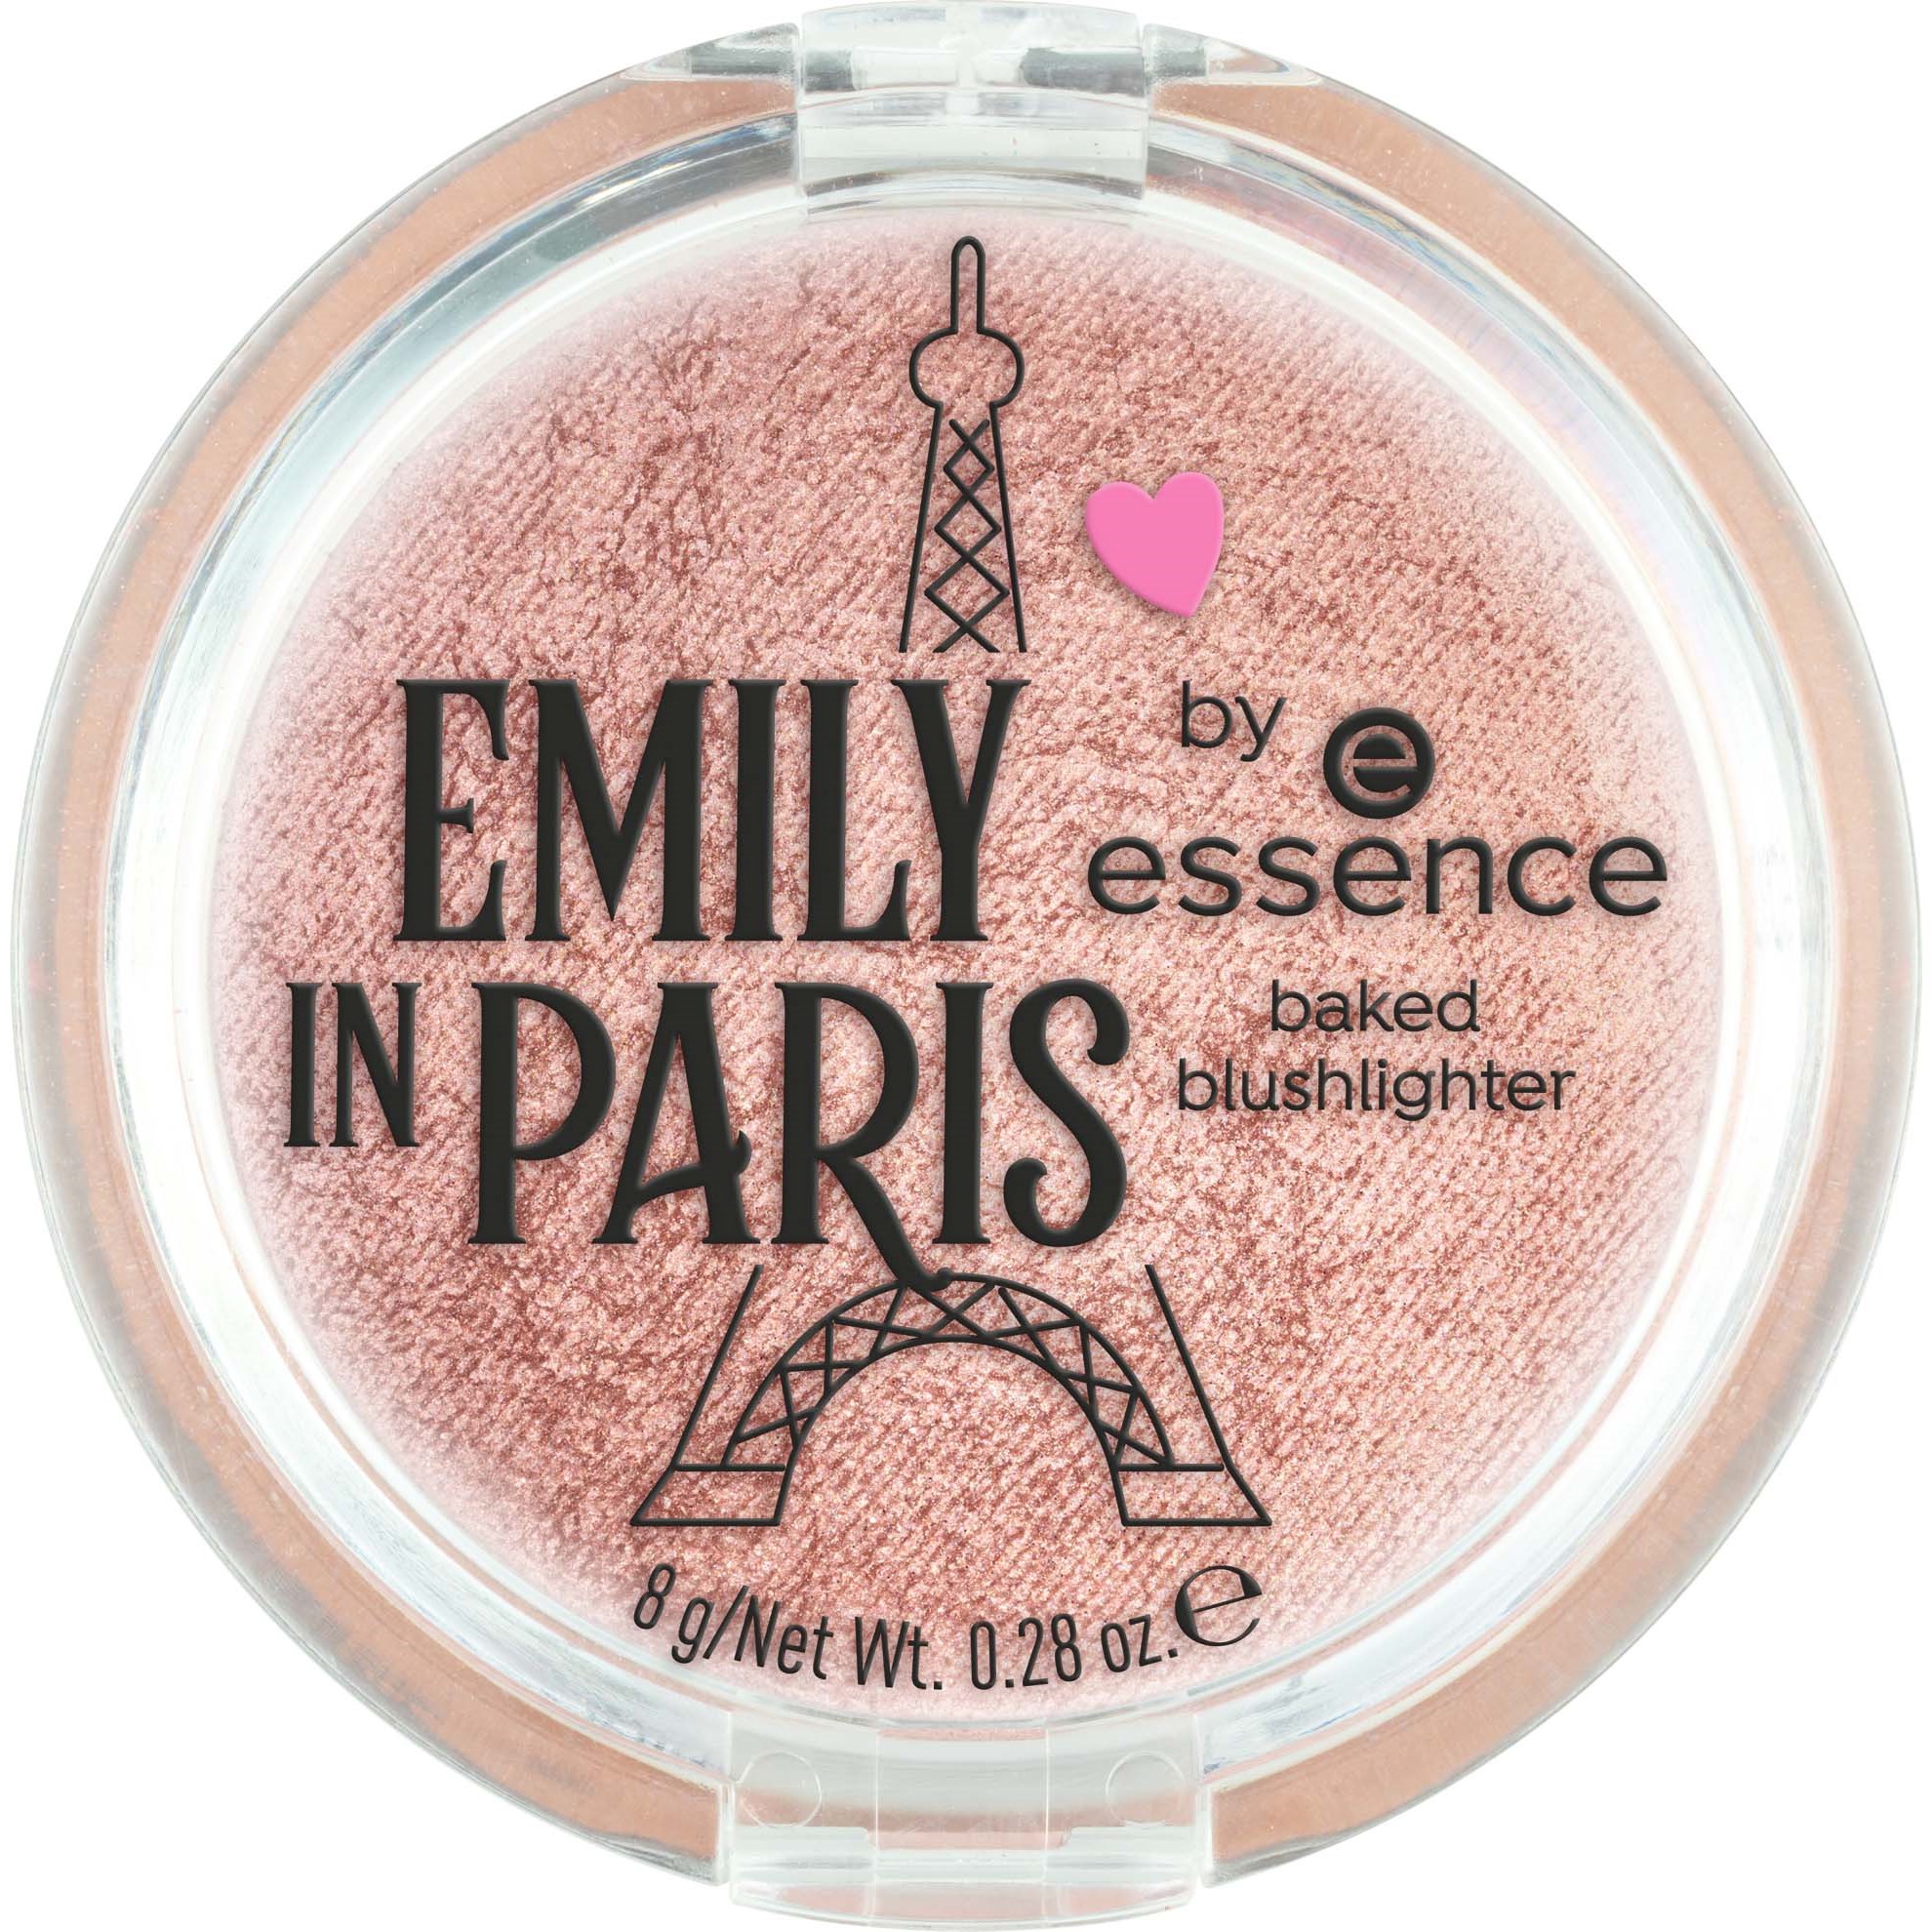 essence Emily In Paris By essence Baked Blushlighter